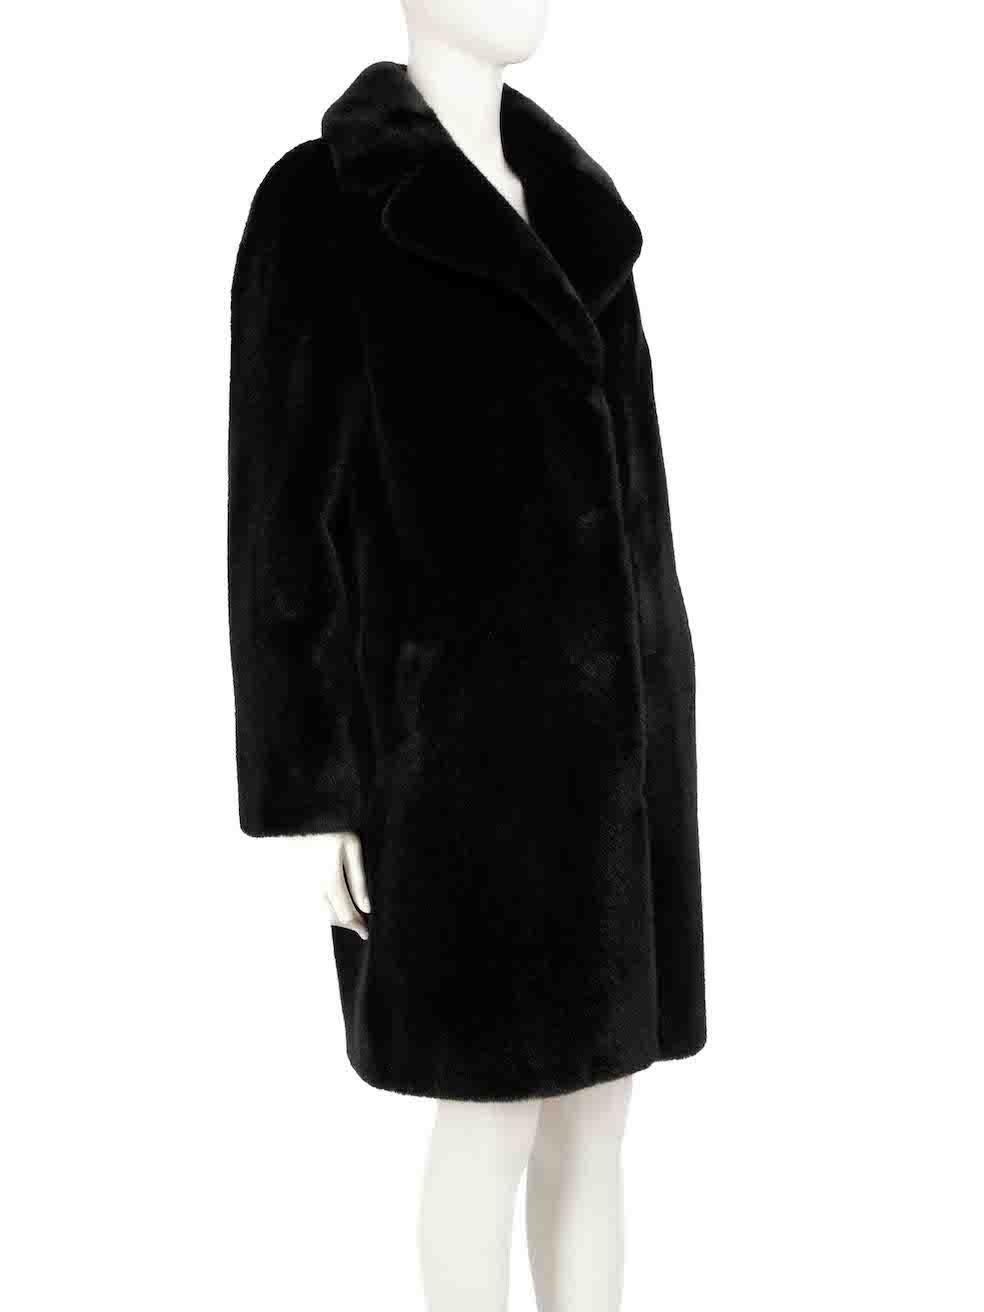 CONDITION is Very good. Hardly any visible wear to coat is evident on this used Stand Studio designer resale item.
 
 
 
 Details
 
 
 Model: Camille Cocoon
 
 Black
 
 Faux fur
 
 Coat
 
 Oversized fit
 
 Snap button fastening
 
 2x Side pockets
 
